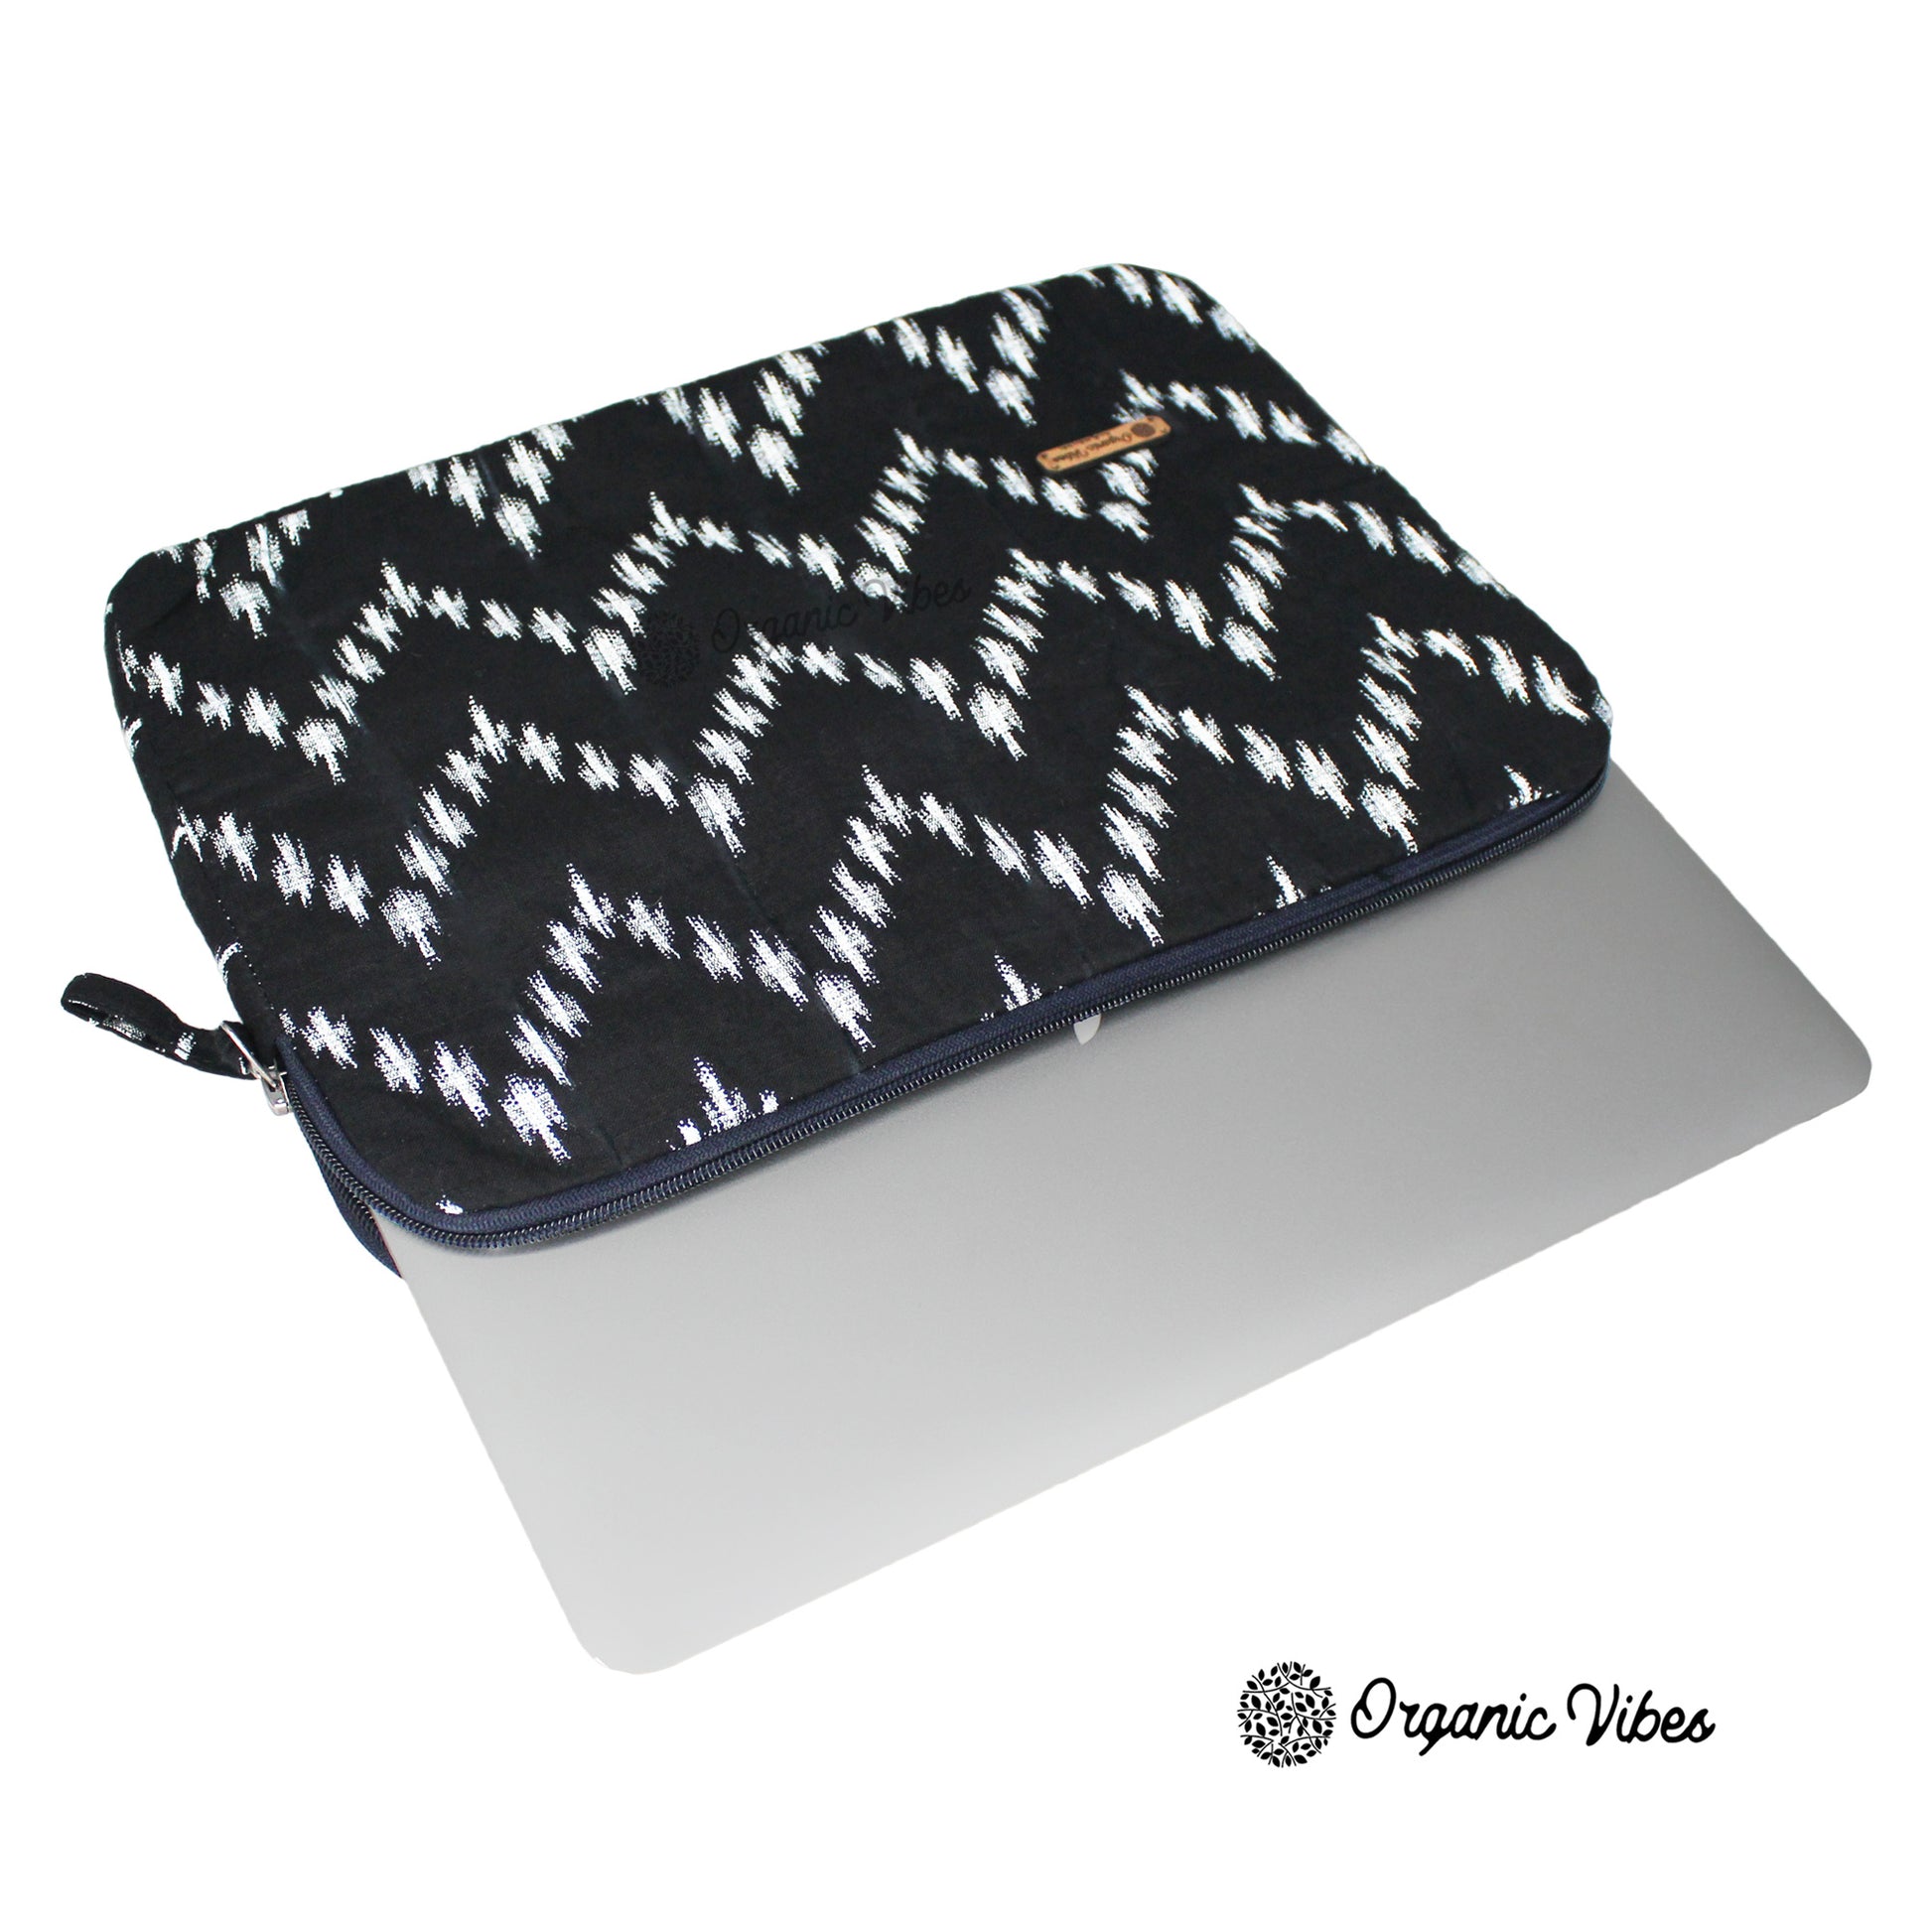 Organic Vibes Hand Block Ikat Printed Black Laptop Sleeves for Laptop 13 Inches